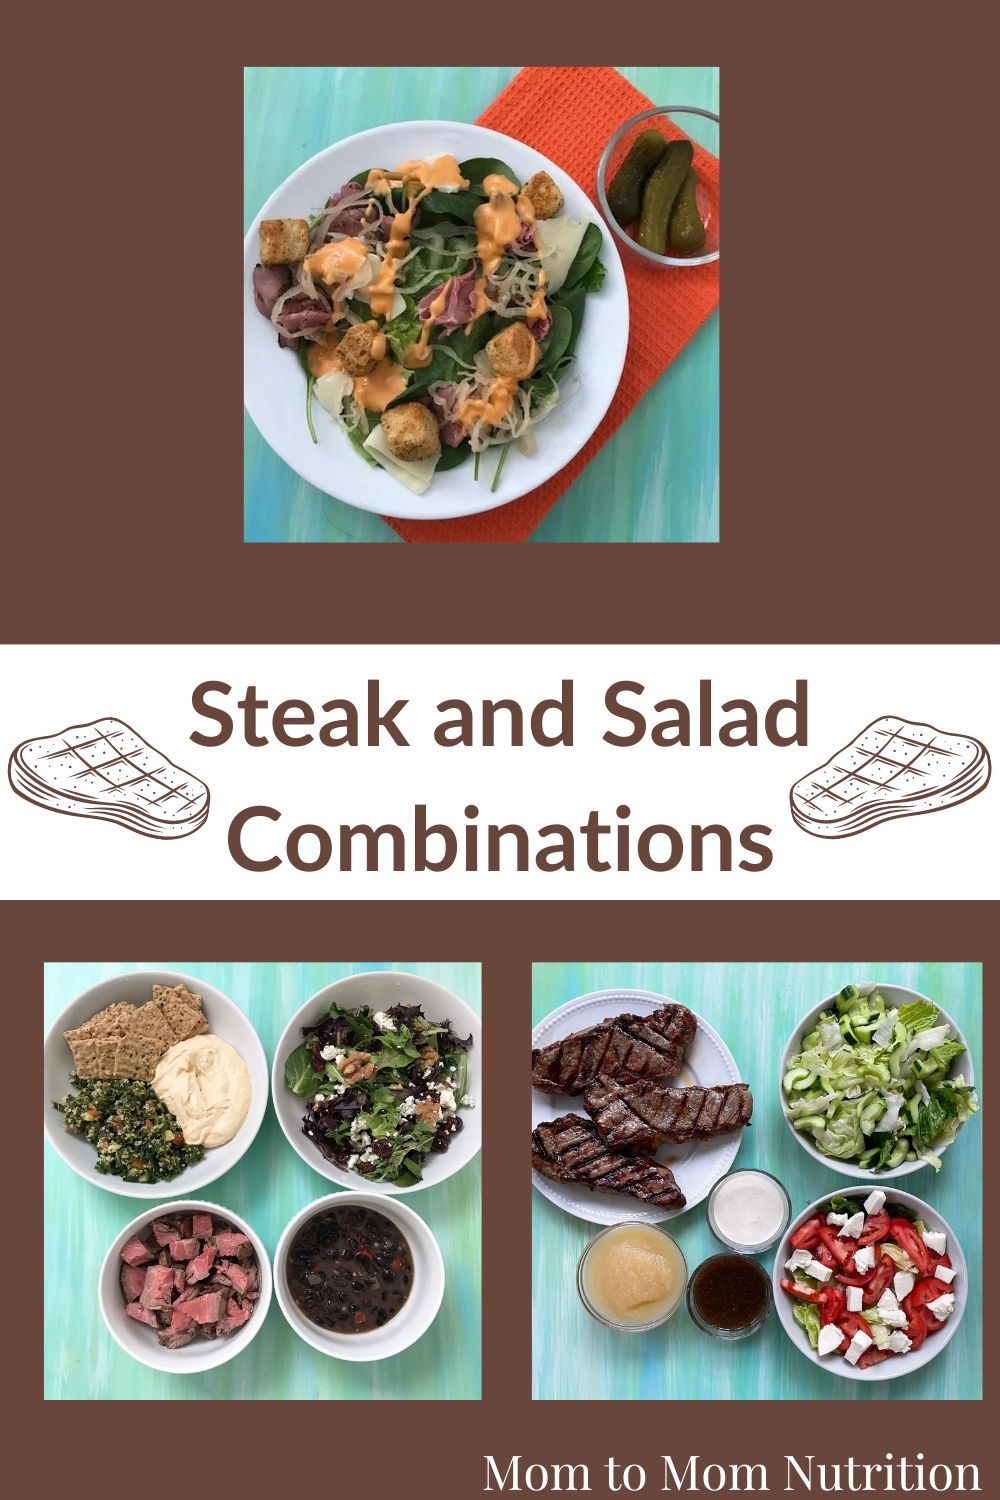 Steak and salad combinations provide the best of both worlds: lots of color and nutrition in every bite. Mix n' match your favorite cut of beef with your favorite salad mix-in's! 